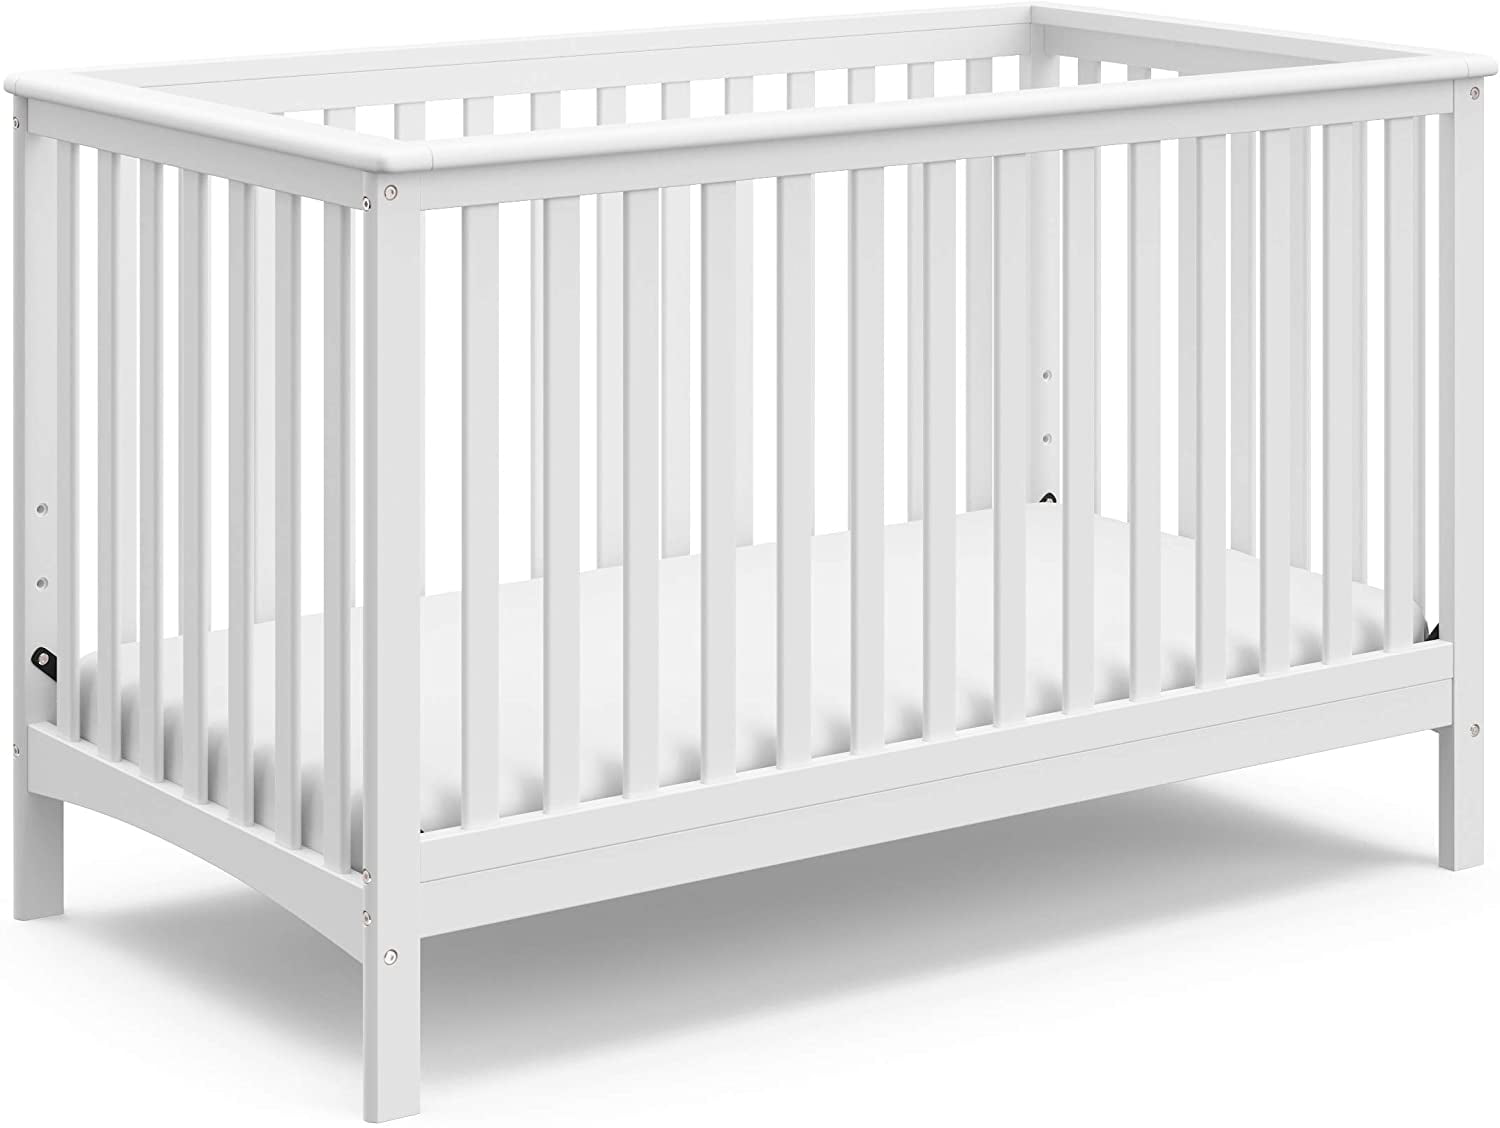 Some Assembly Required Three Position Adjustable Height Mattress Easily Converts to Toddler Bed Day Bed or Full Bed White/Pebble Gray Storkcraft Sienna 3-in-1 Convertible Crib